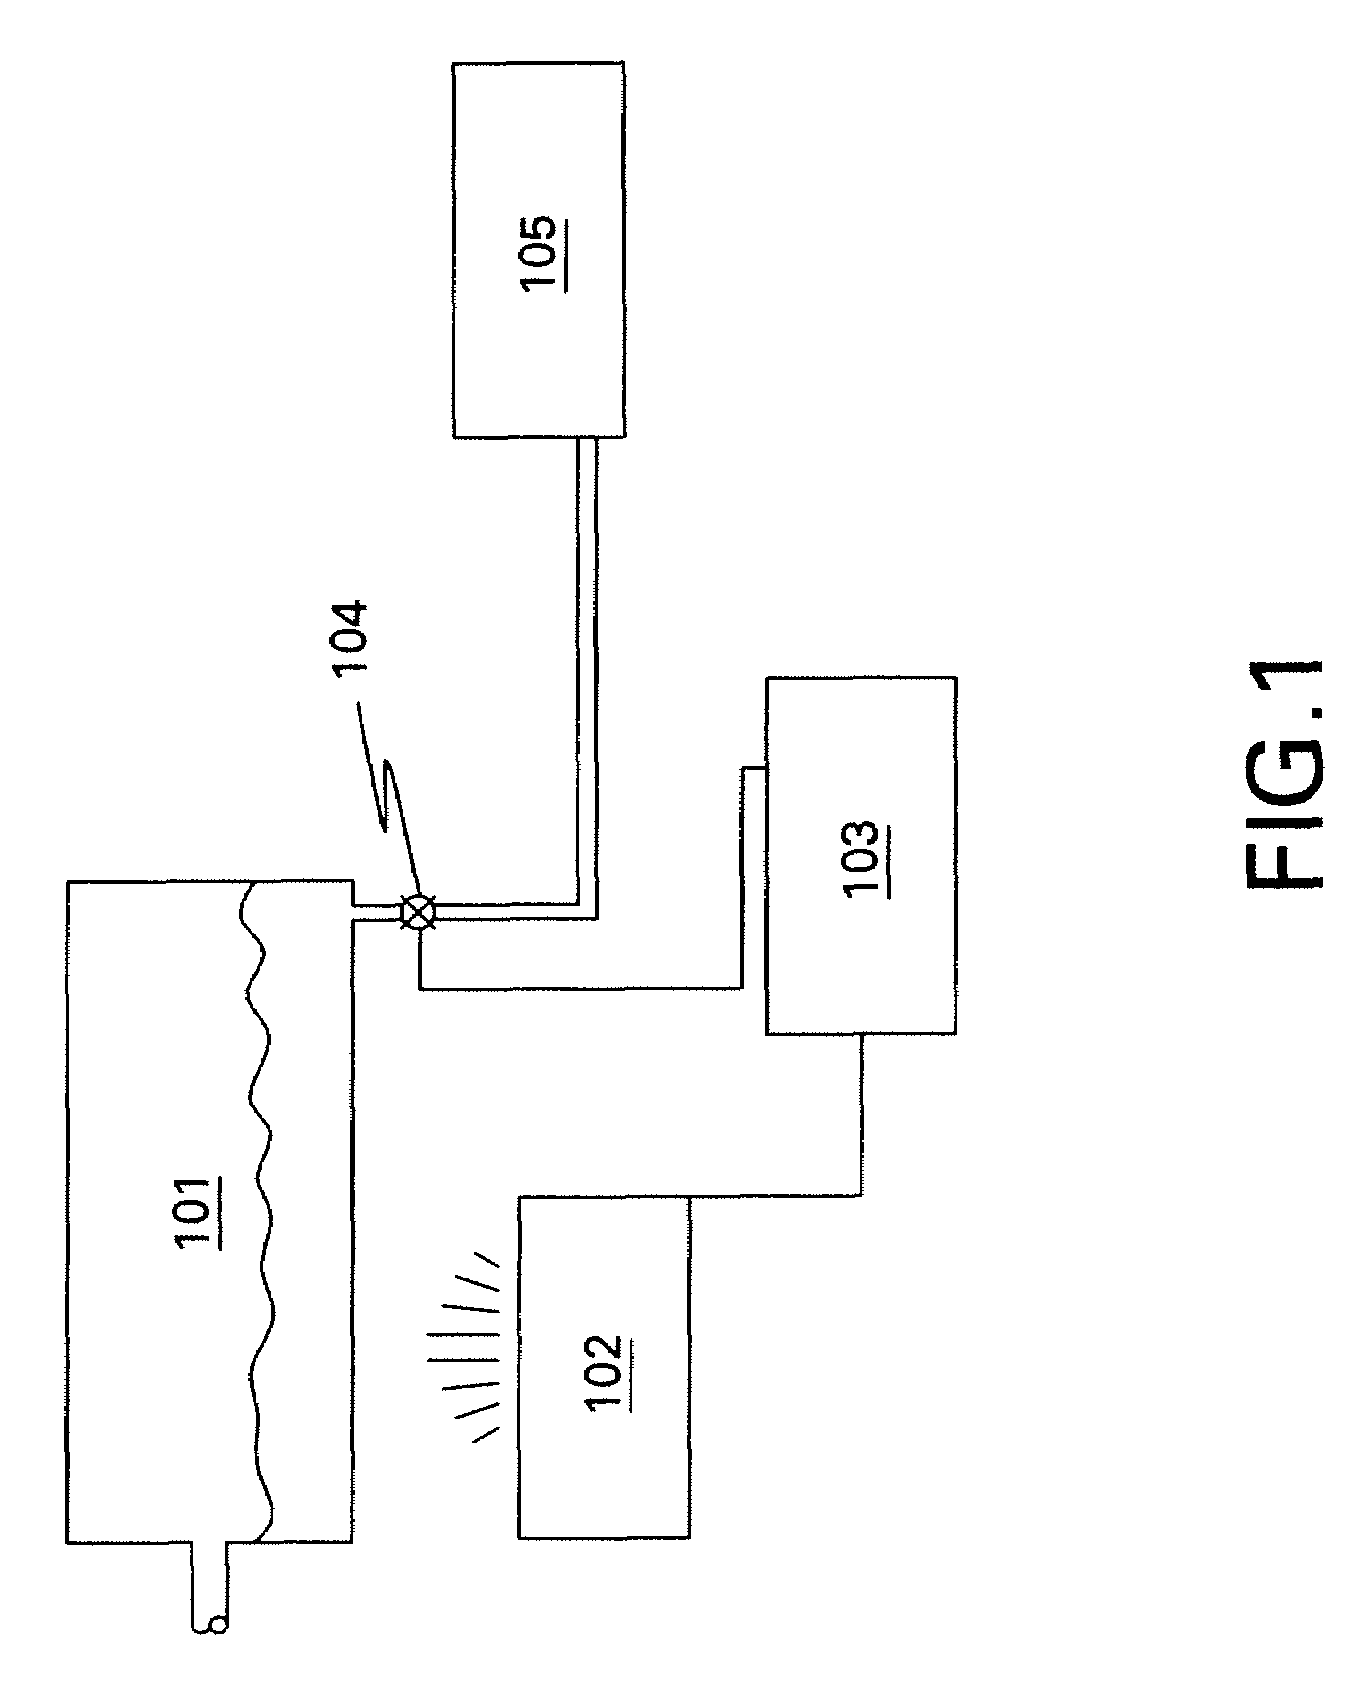 Apparatus and method for fully automated closed system pH measurement